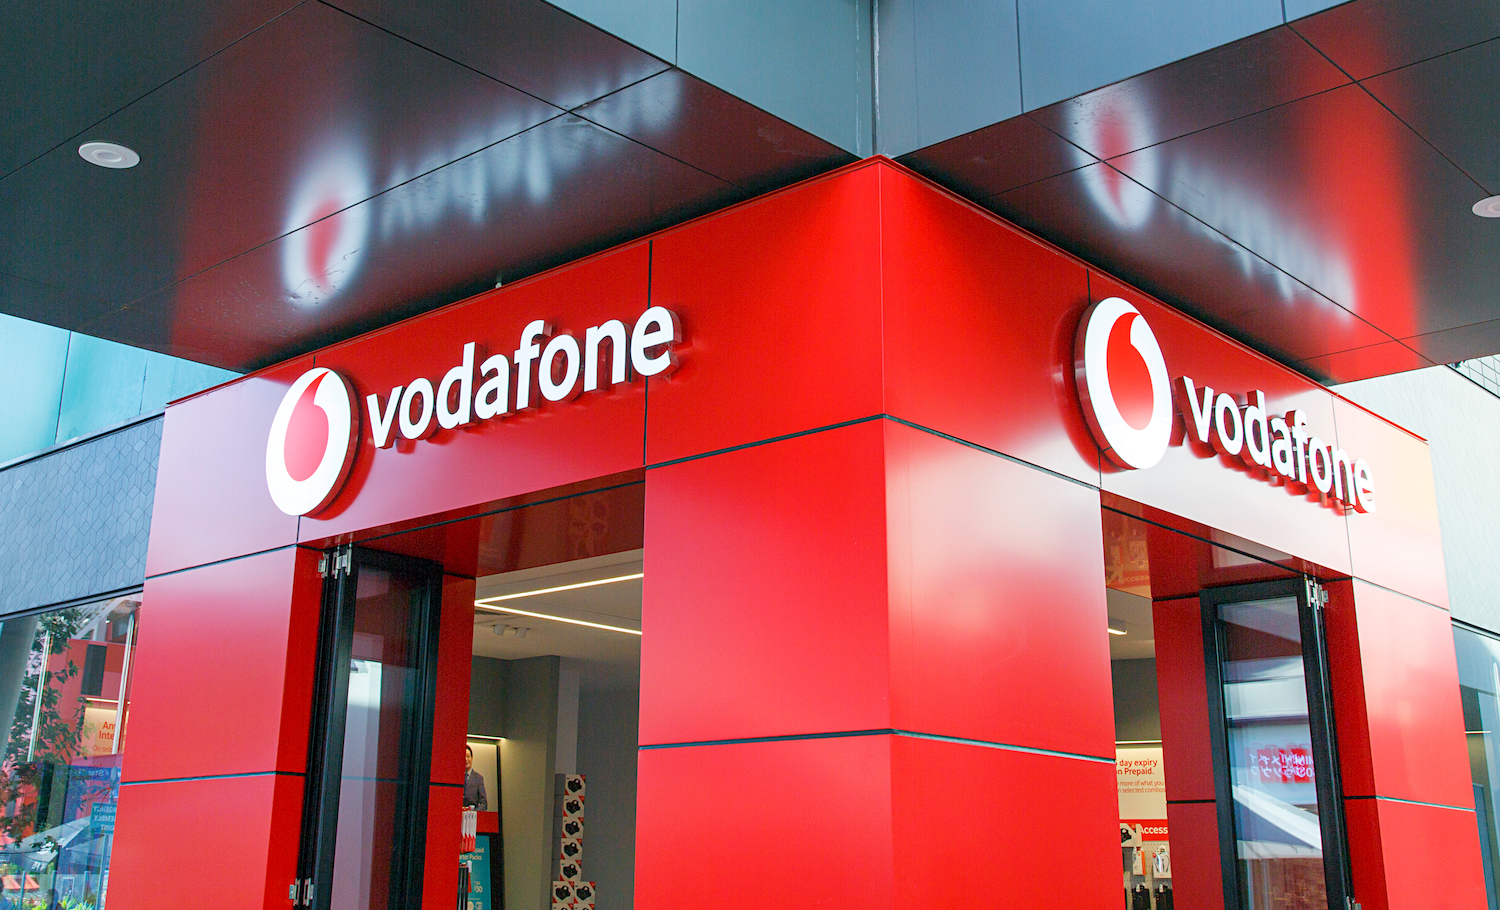 Spotify offers free Premium trial for Aussie Vodafone customers